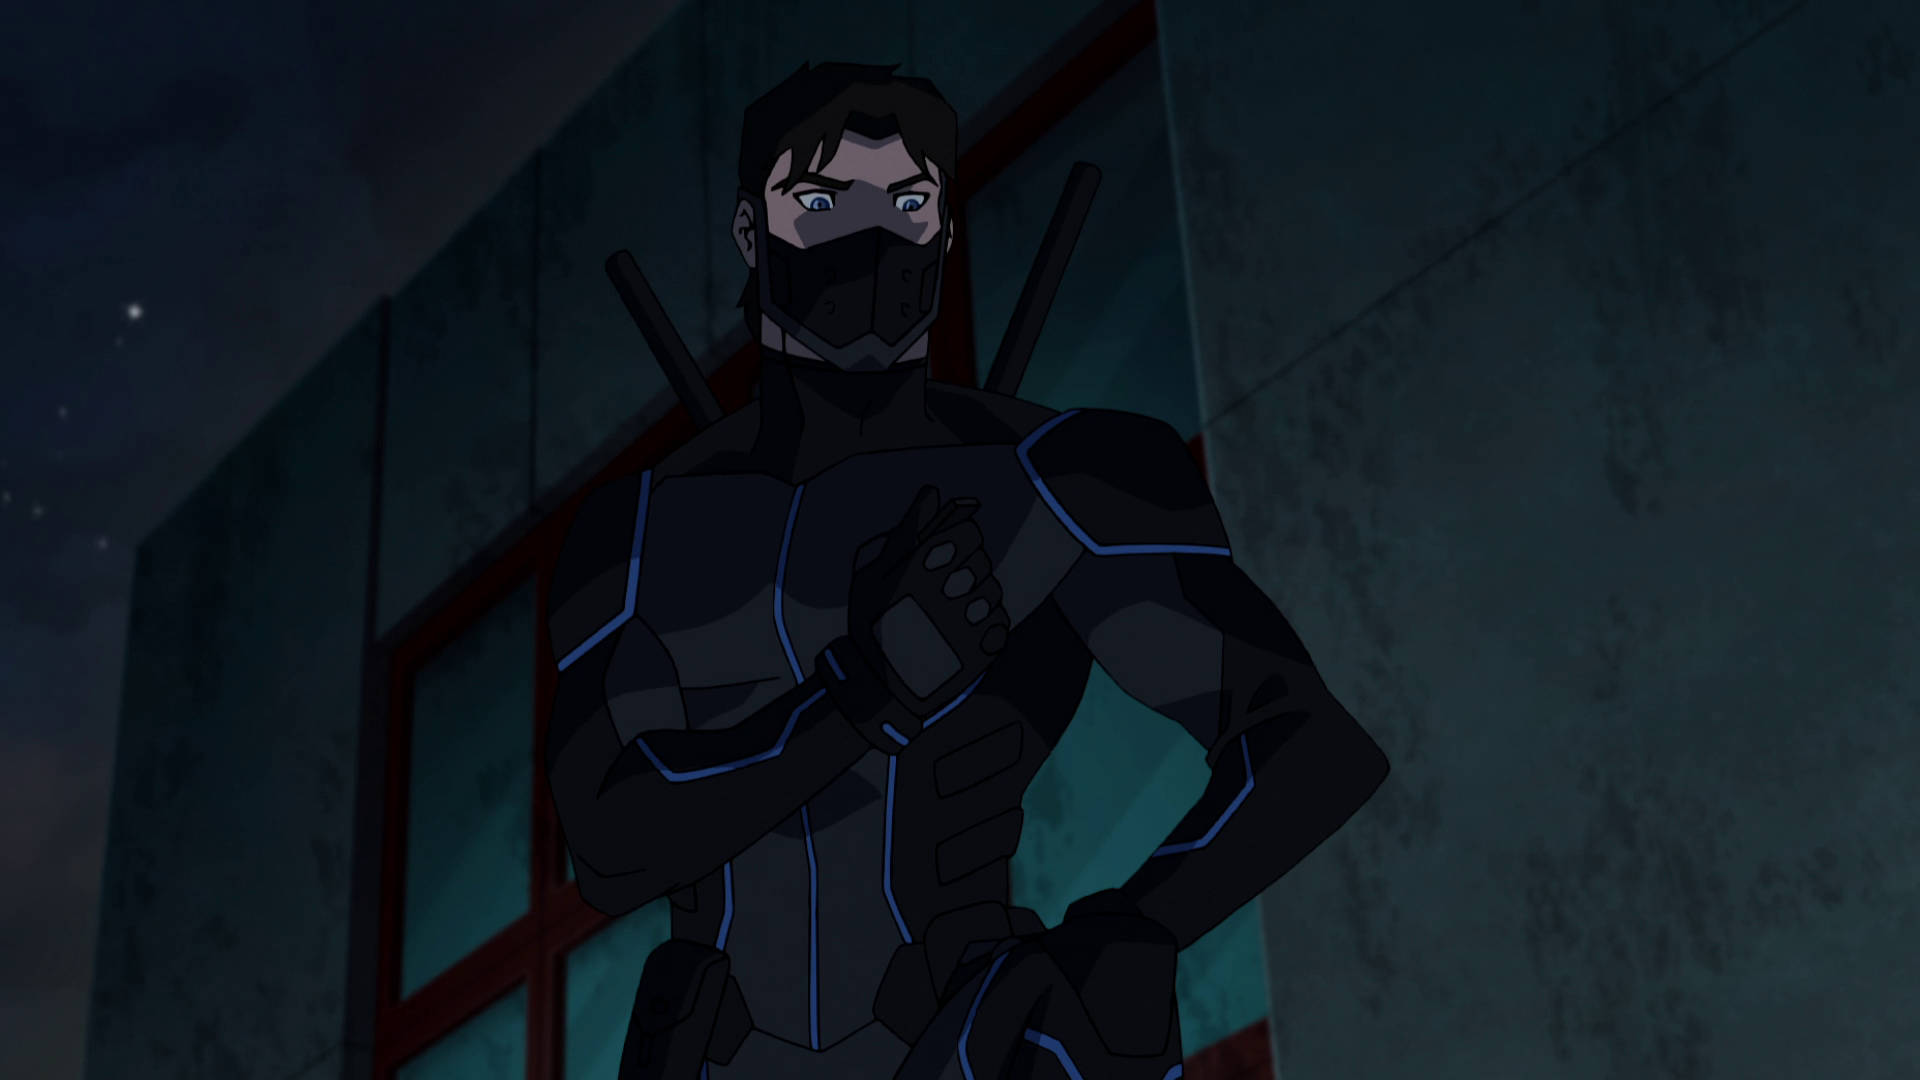 Youngjustice Nightwing Stealth Anzug Wallpaper